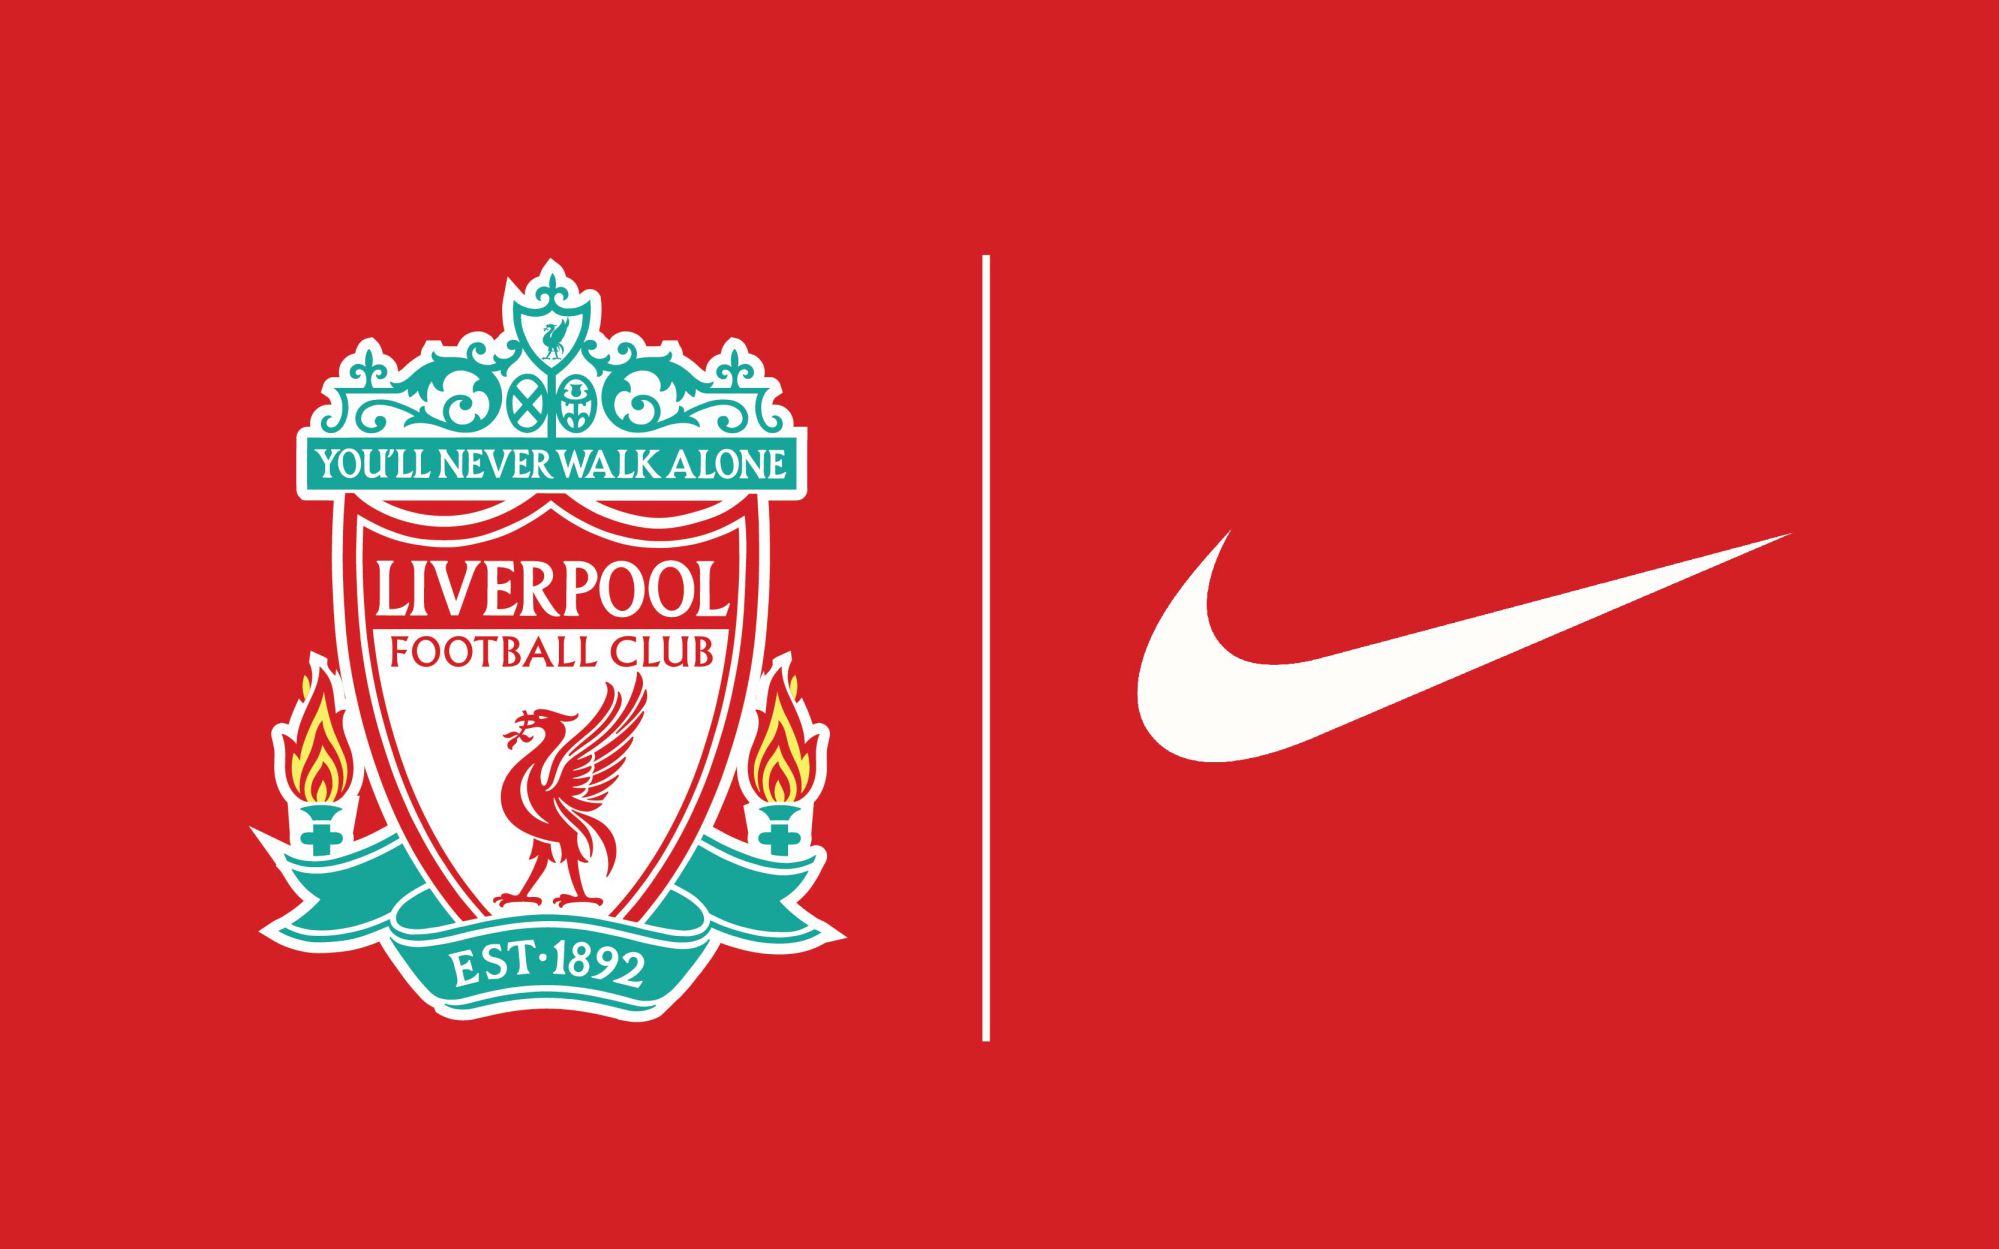 Liverpool is to sign a deal with Nike